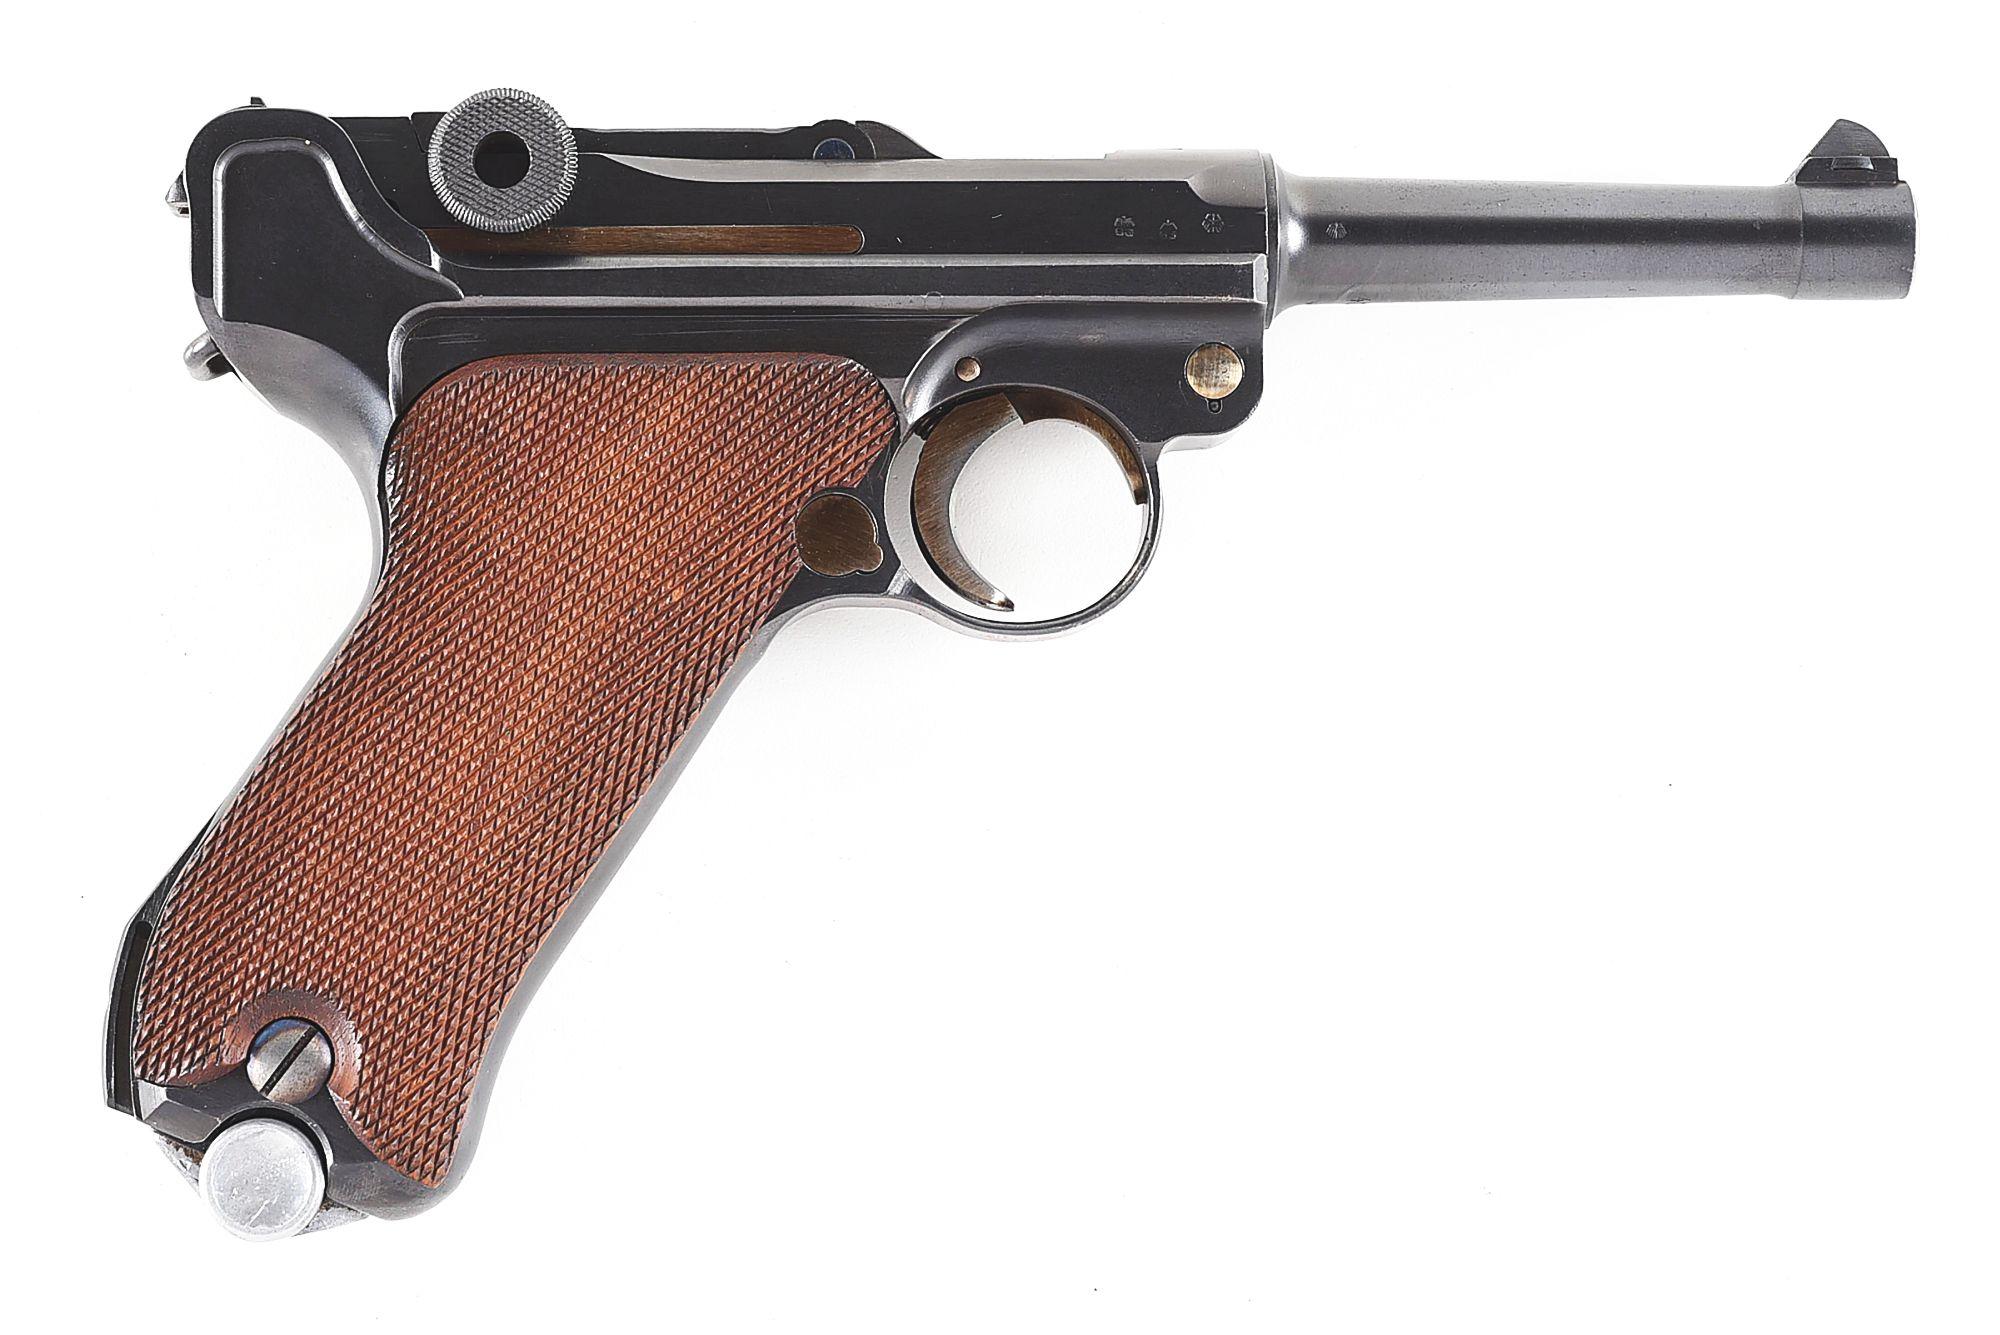 (C) MAUSER S/42 CODE P.08 LUGER SEMI-AUTOMATIC PISTOL WITH MATCHING MAGAZINE AND HOLSTER.